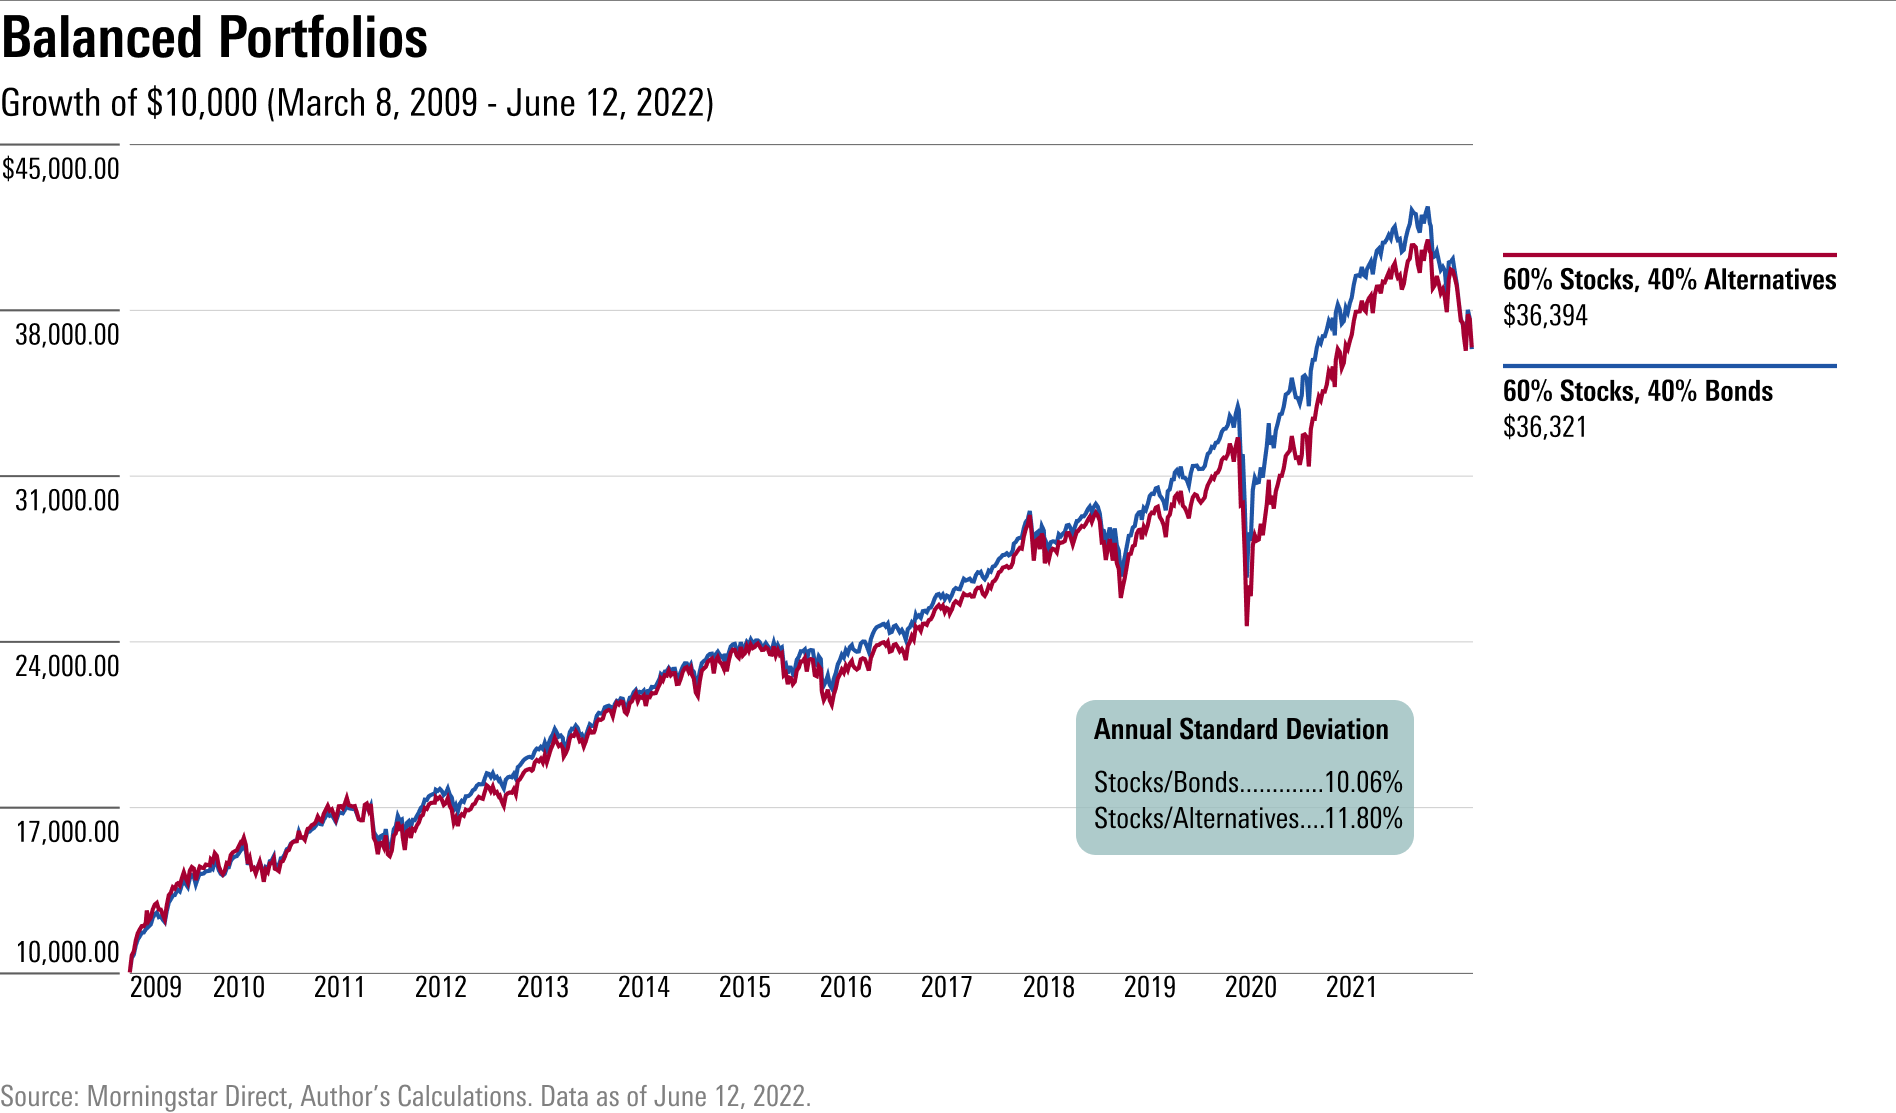 A line chart of the growth of $10,000 over the past 13 years in two versions of balanced portfolios, one that uses bonds and one that uses liquid alternatives.